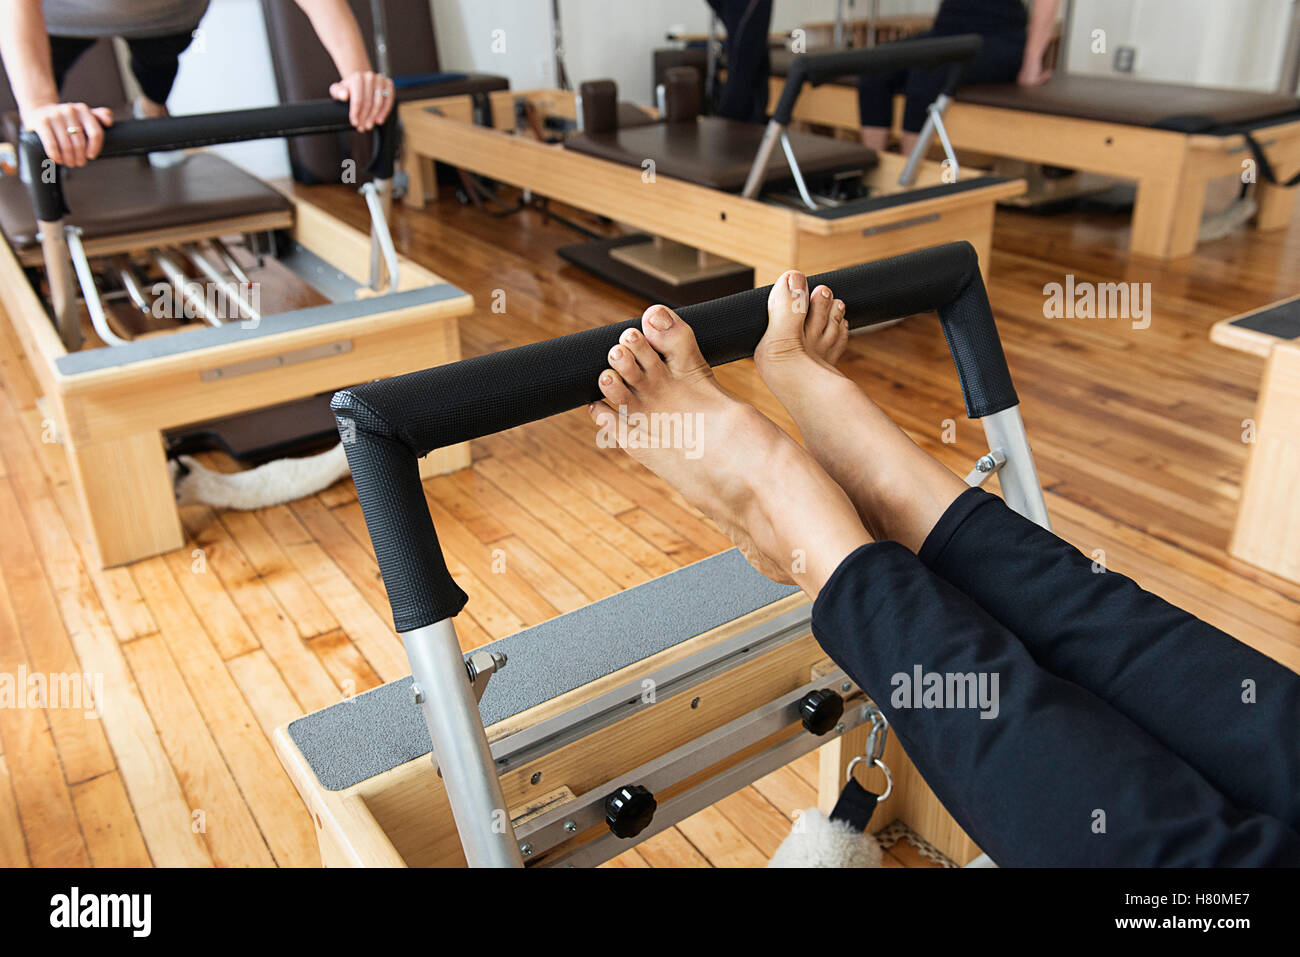 People working out on reformer machines. Stock Photo